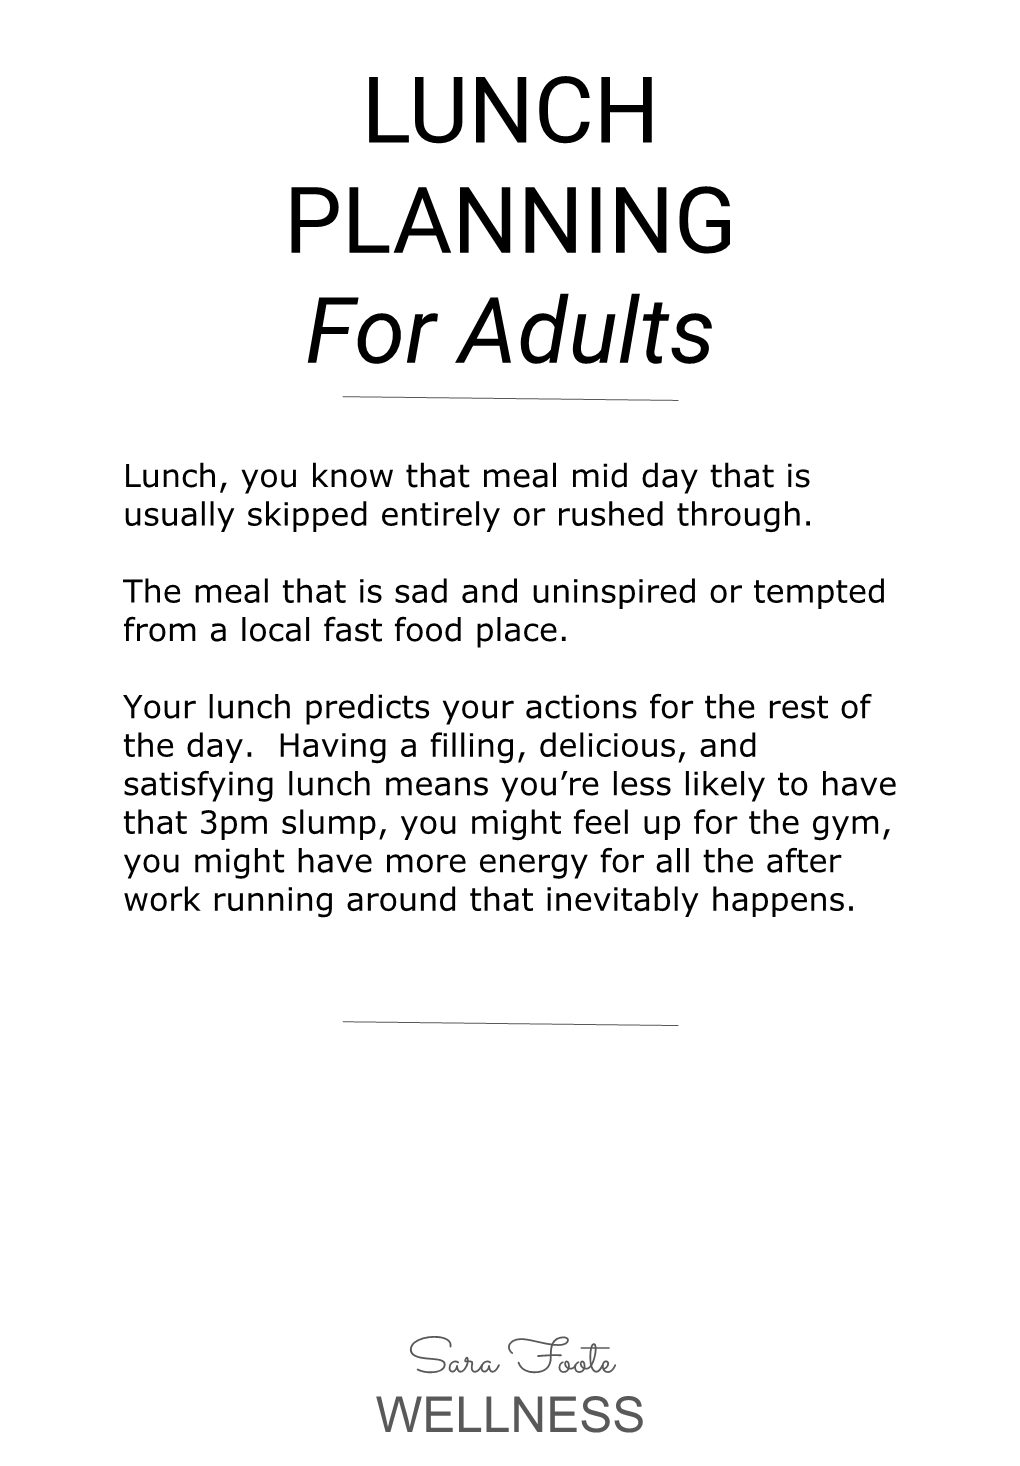 LUNCH PLANNING for Adults